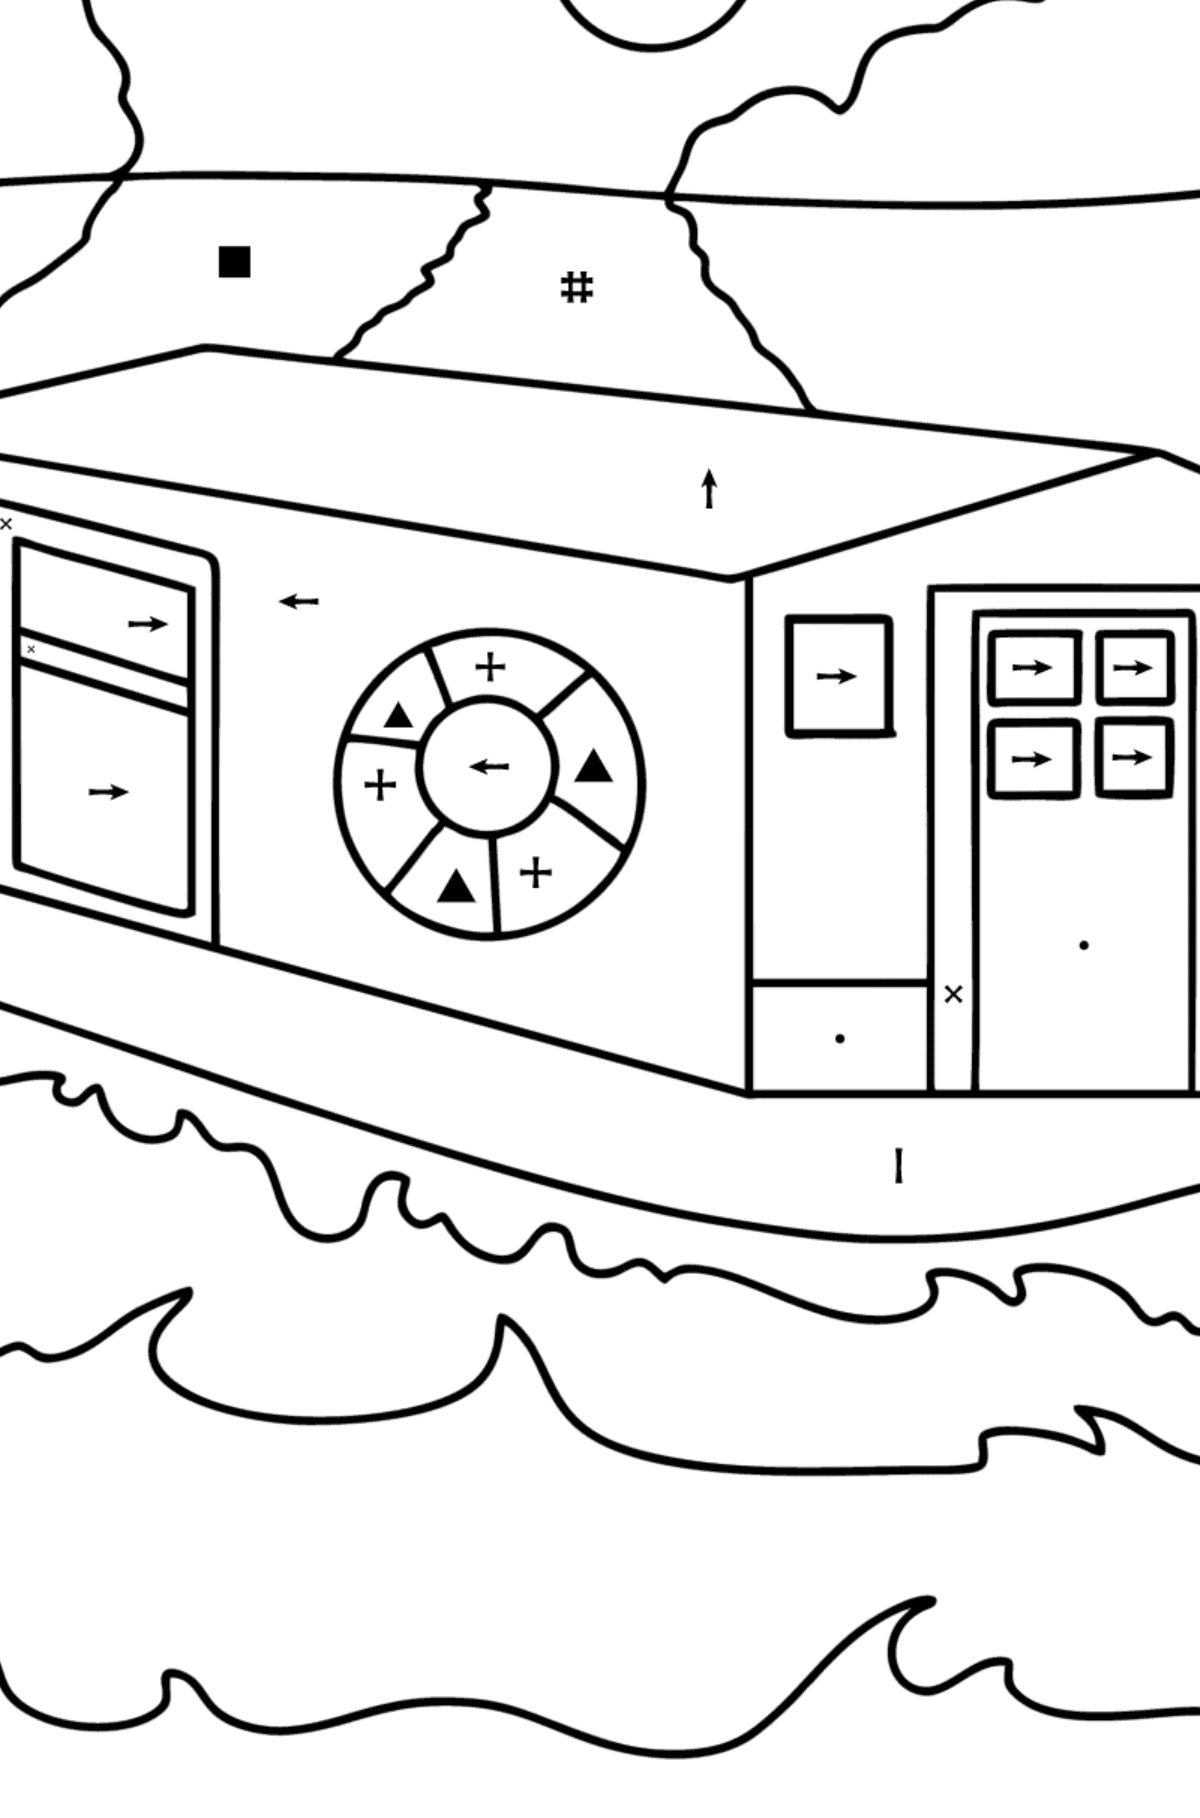 BoatHouse coloring page - Coloring by Symbols for Kids